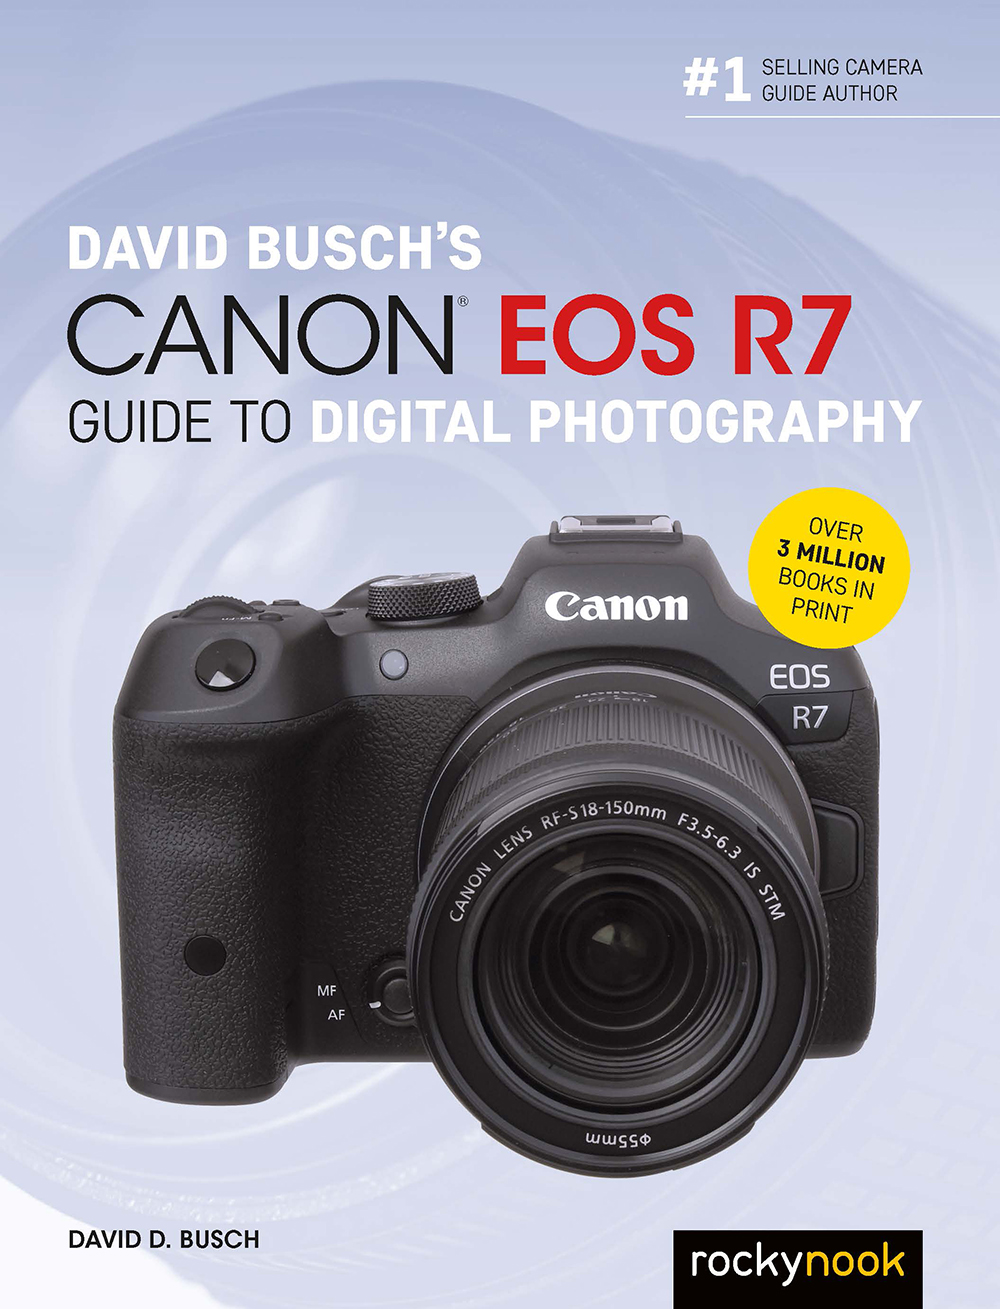 zout herinneringen Ongewapend David Busch's Canon EOS R7 Guide to Digital Photography - RockyNook